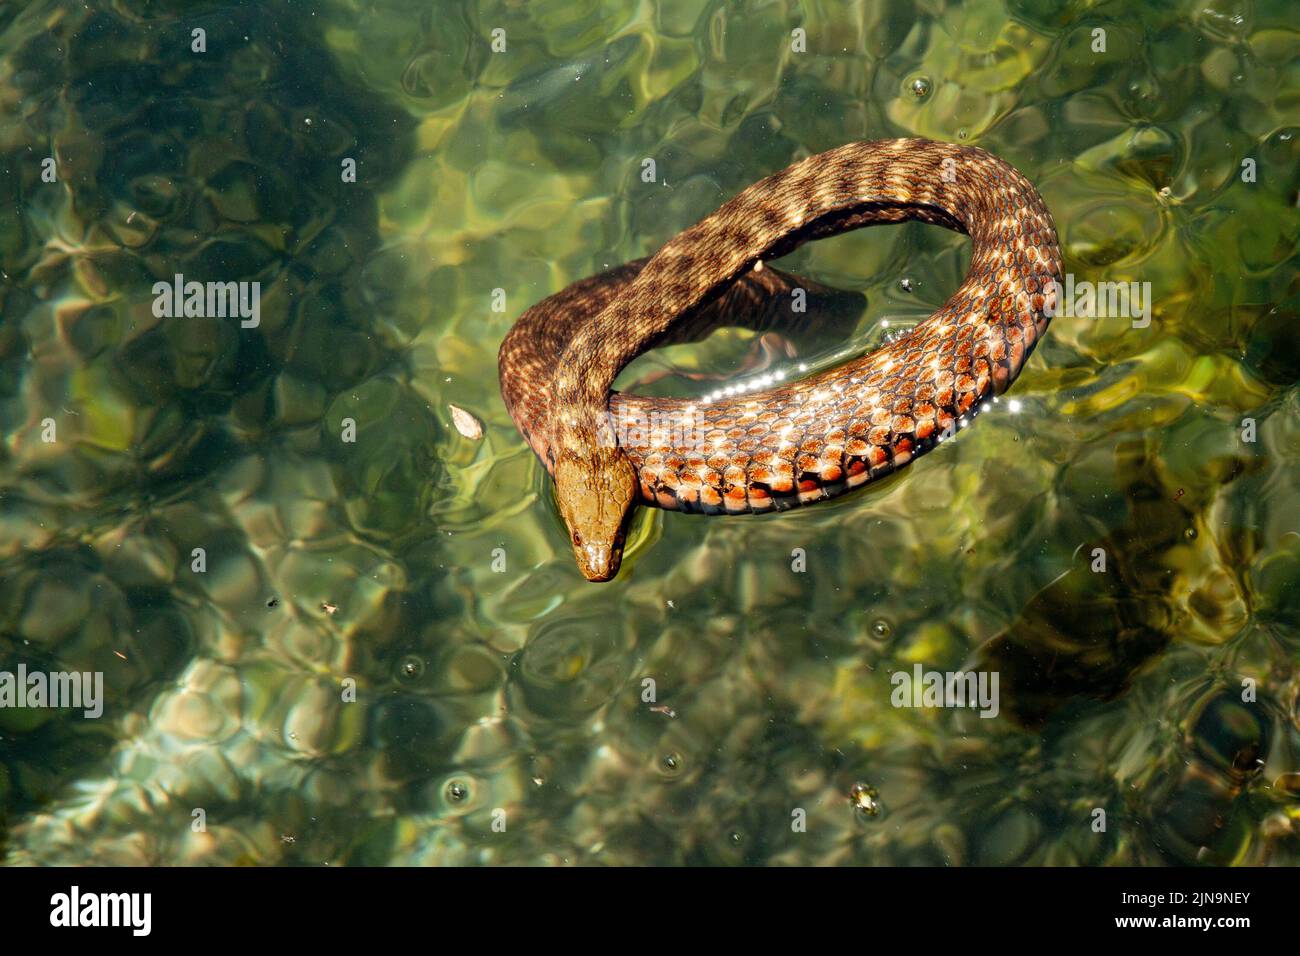 A dice snake floating in the river Stock Photo